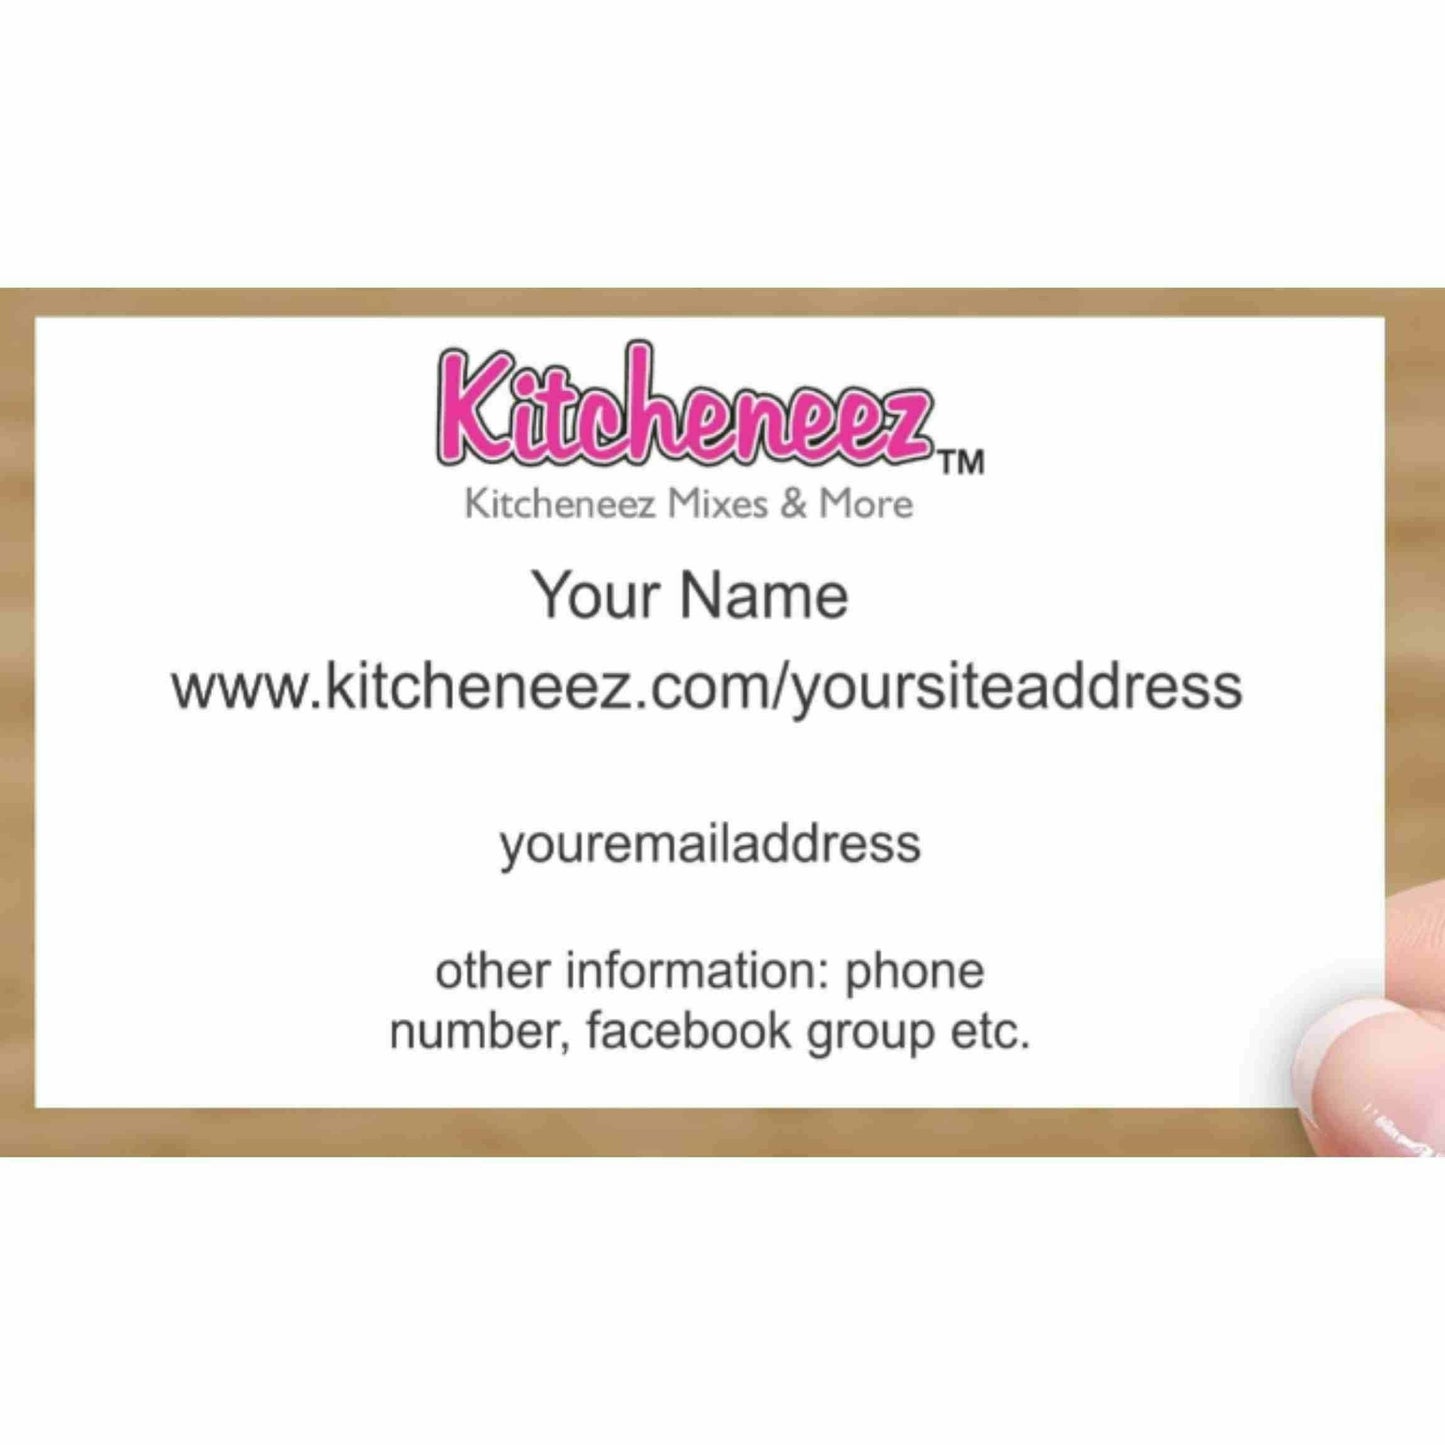 Marketing: 500 Business cards- Food pics design (double sided) - Kitcheneez Mixes & More!